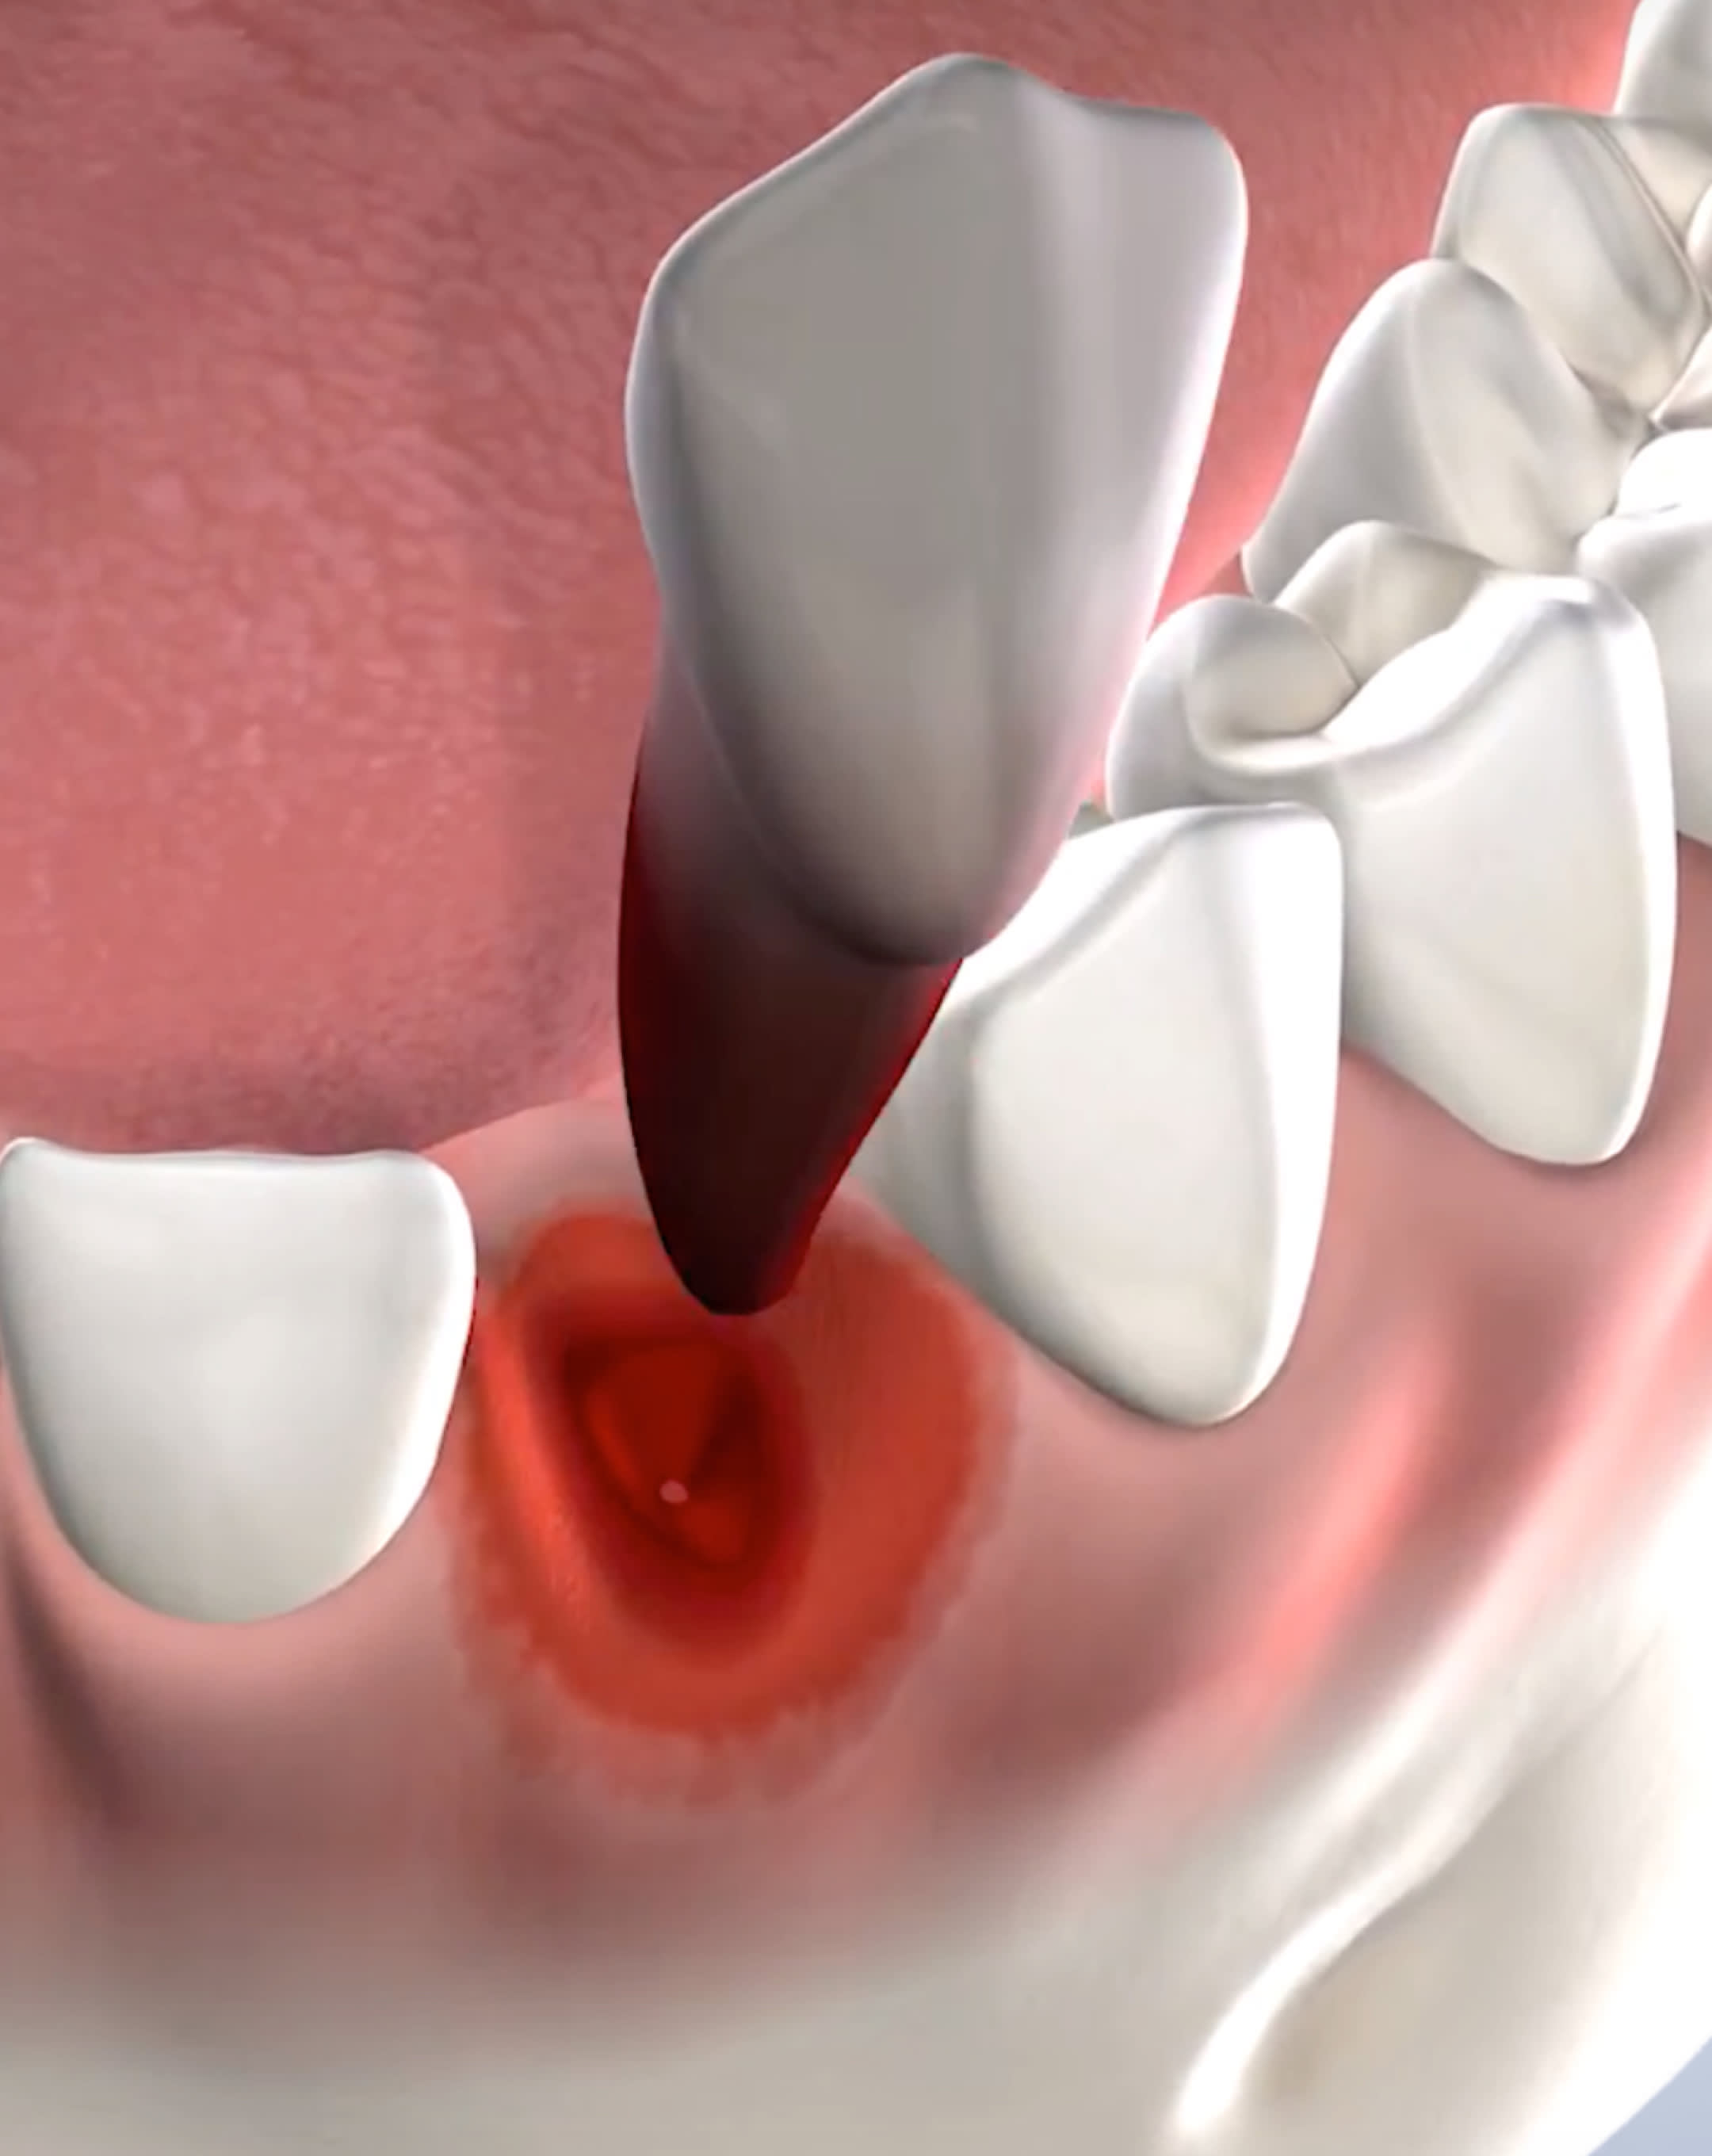 Tooth extractions in Houston, TX